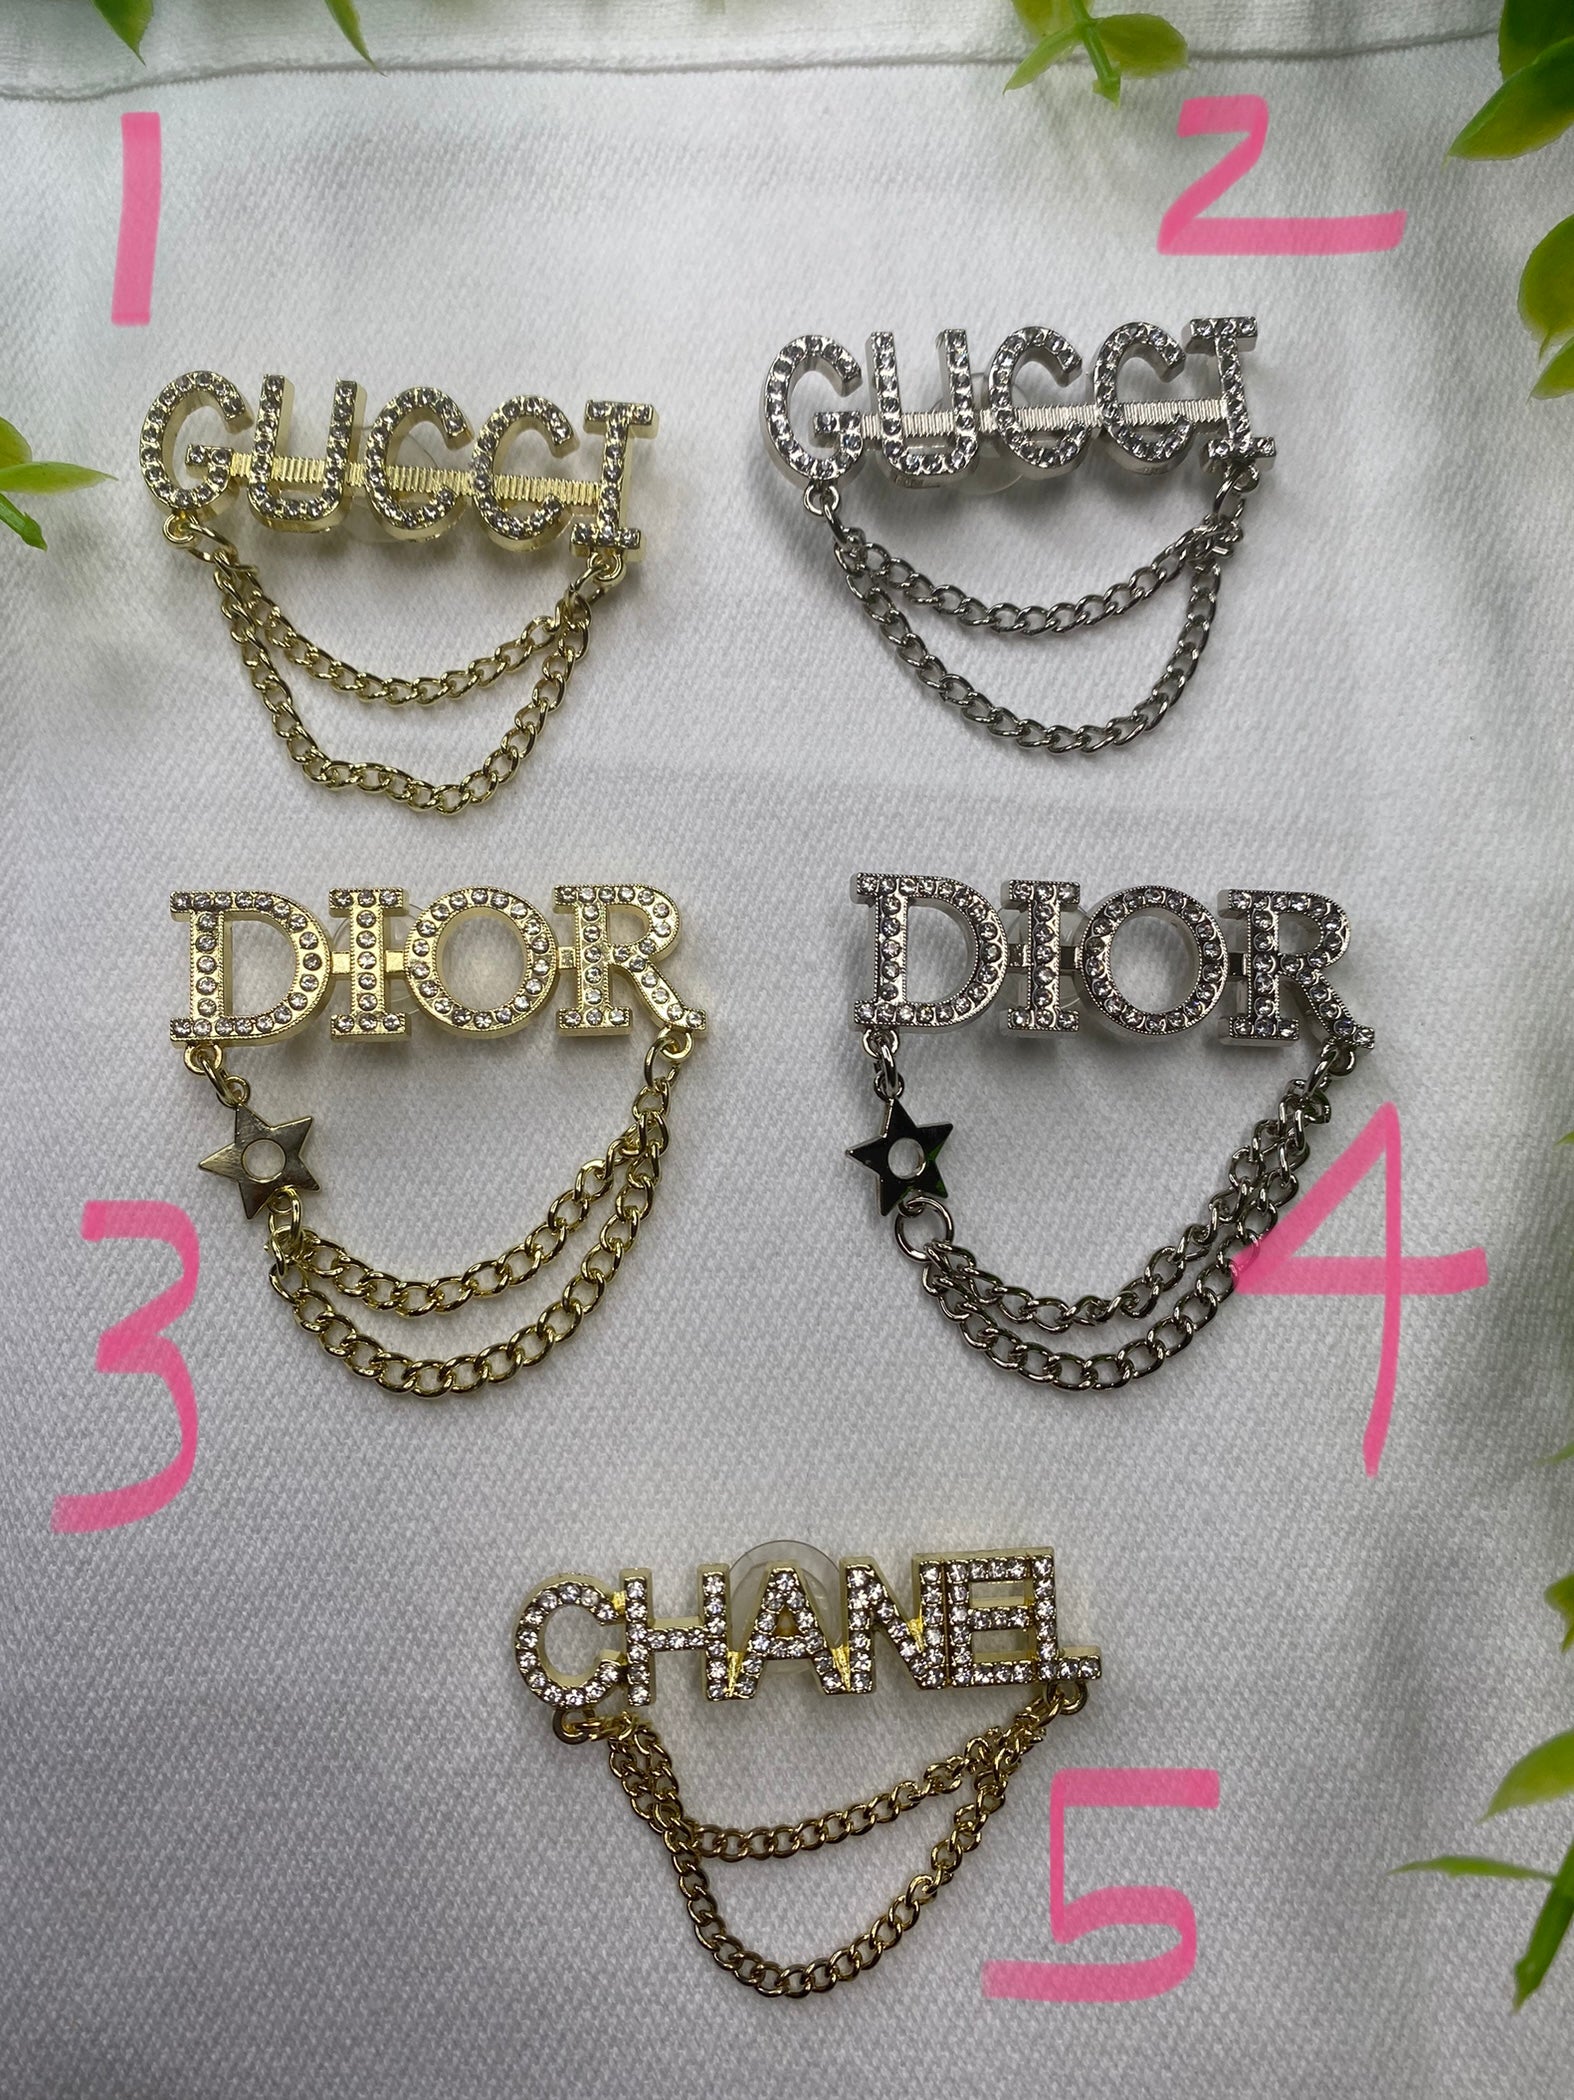 Chanel Themed Croc Charms